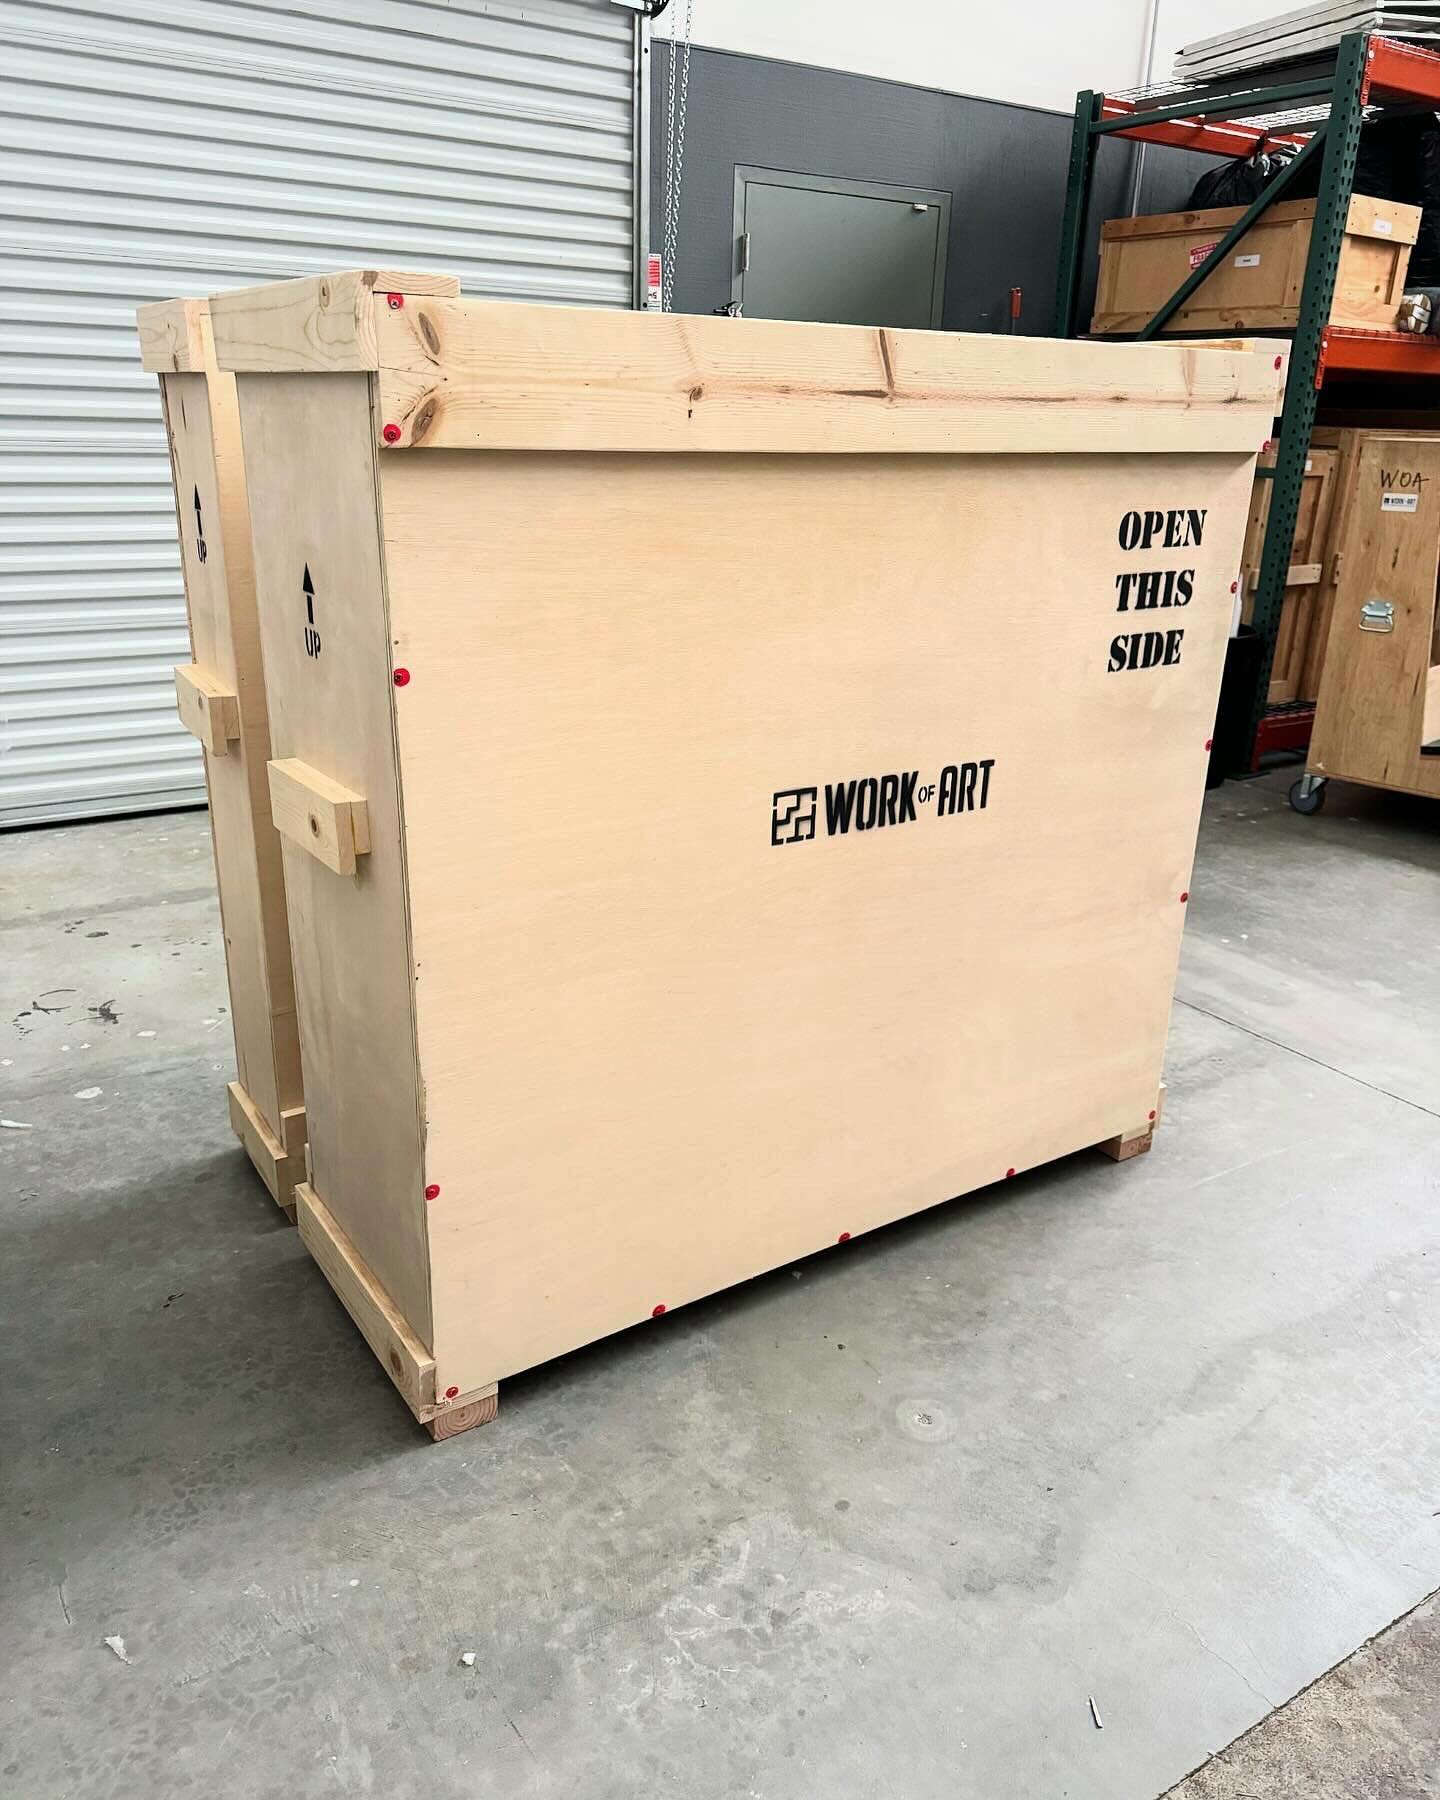 Two fresh crates off for a short journey! 

Our standard crates are built to last cross-country, domestic trips. All art is wrapped in clear, acid-free plastic and cardboard or foam corners for its protection! 

Each standard crate comes with 1inch h